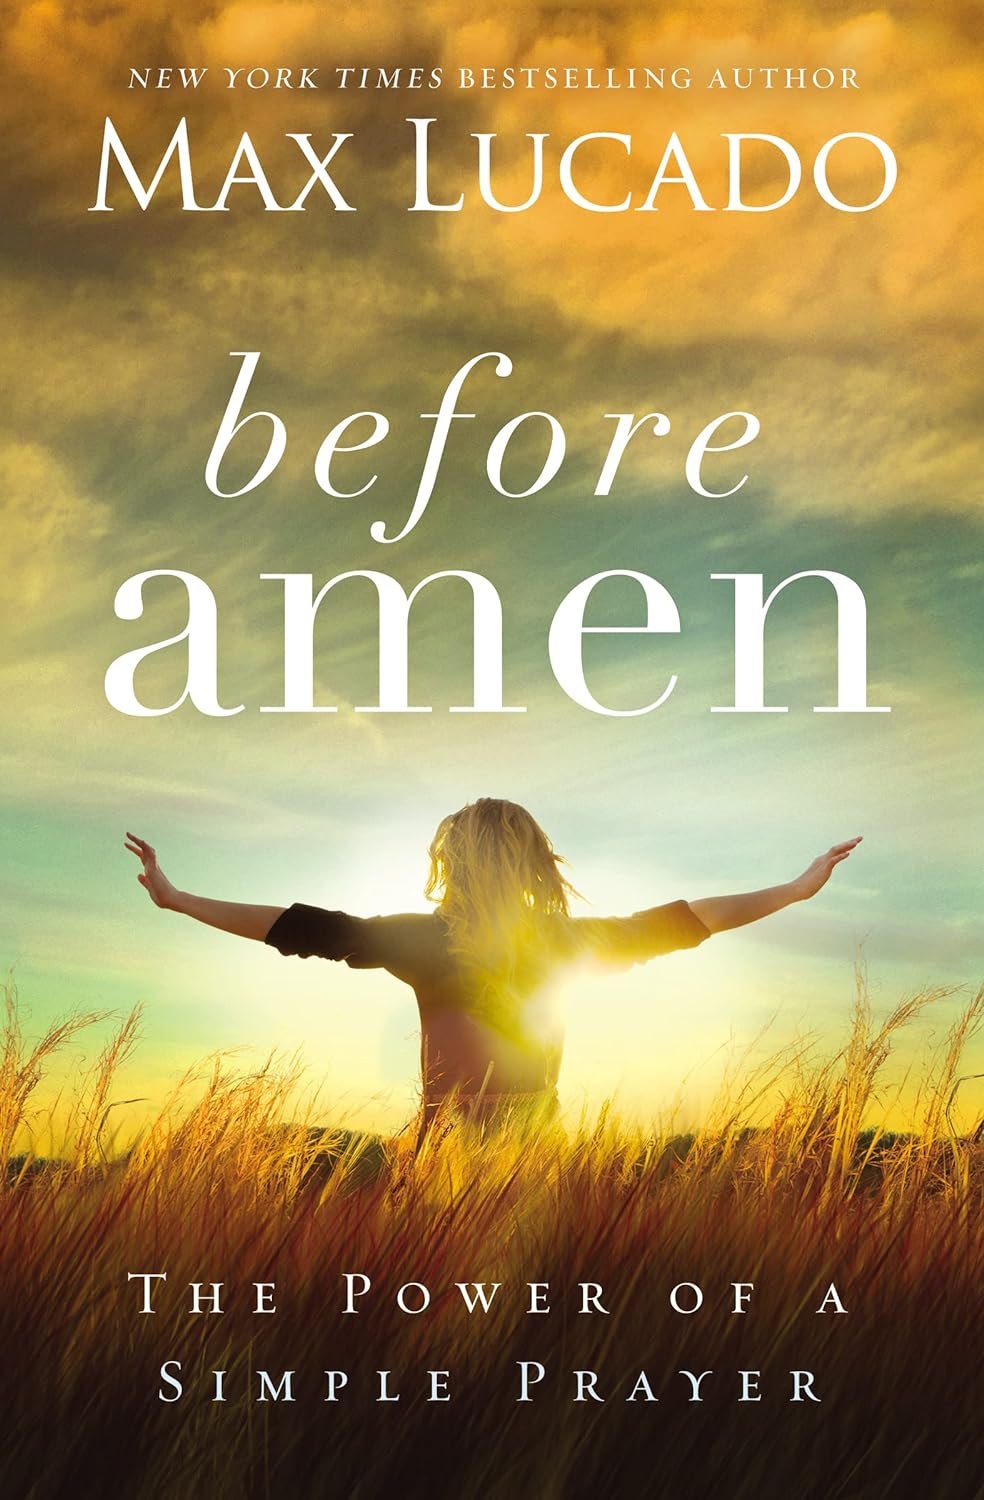 “Before Amen: The Power of a Simple Prayer” - by Max Lucado